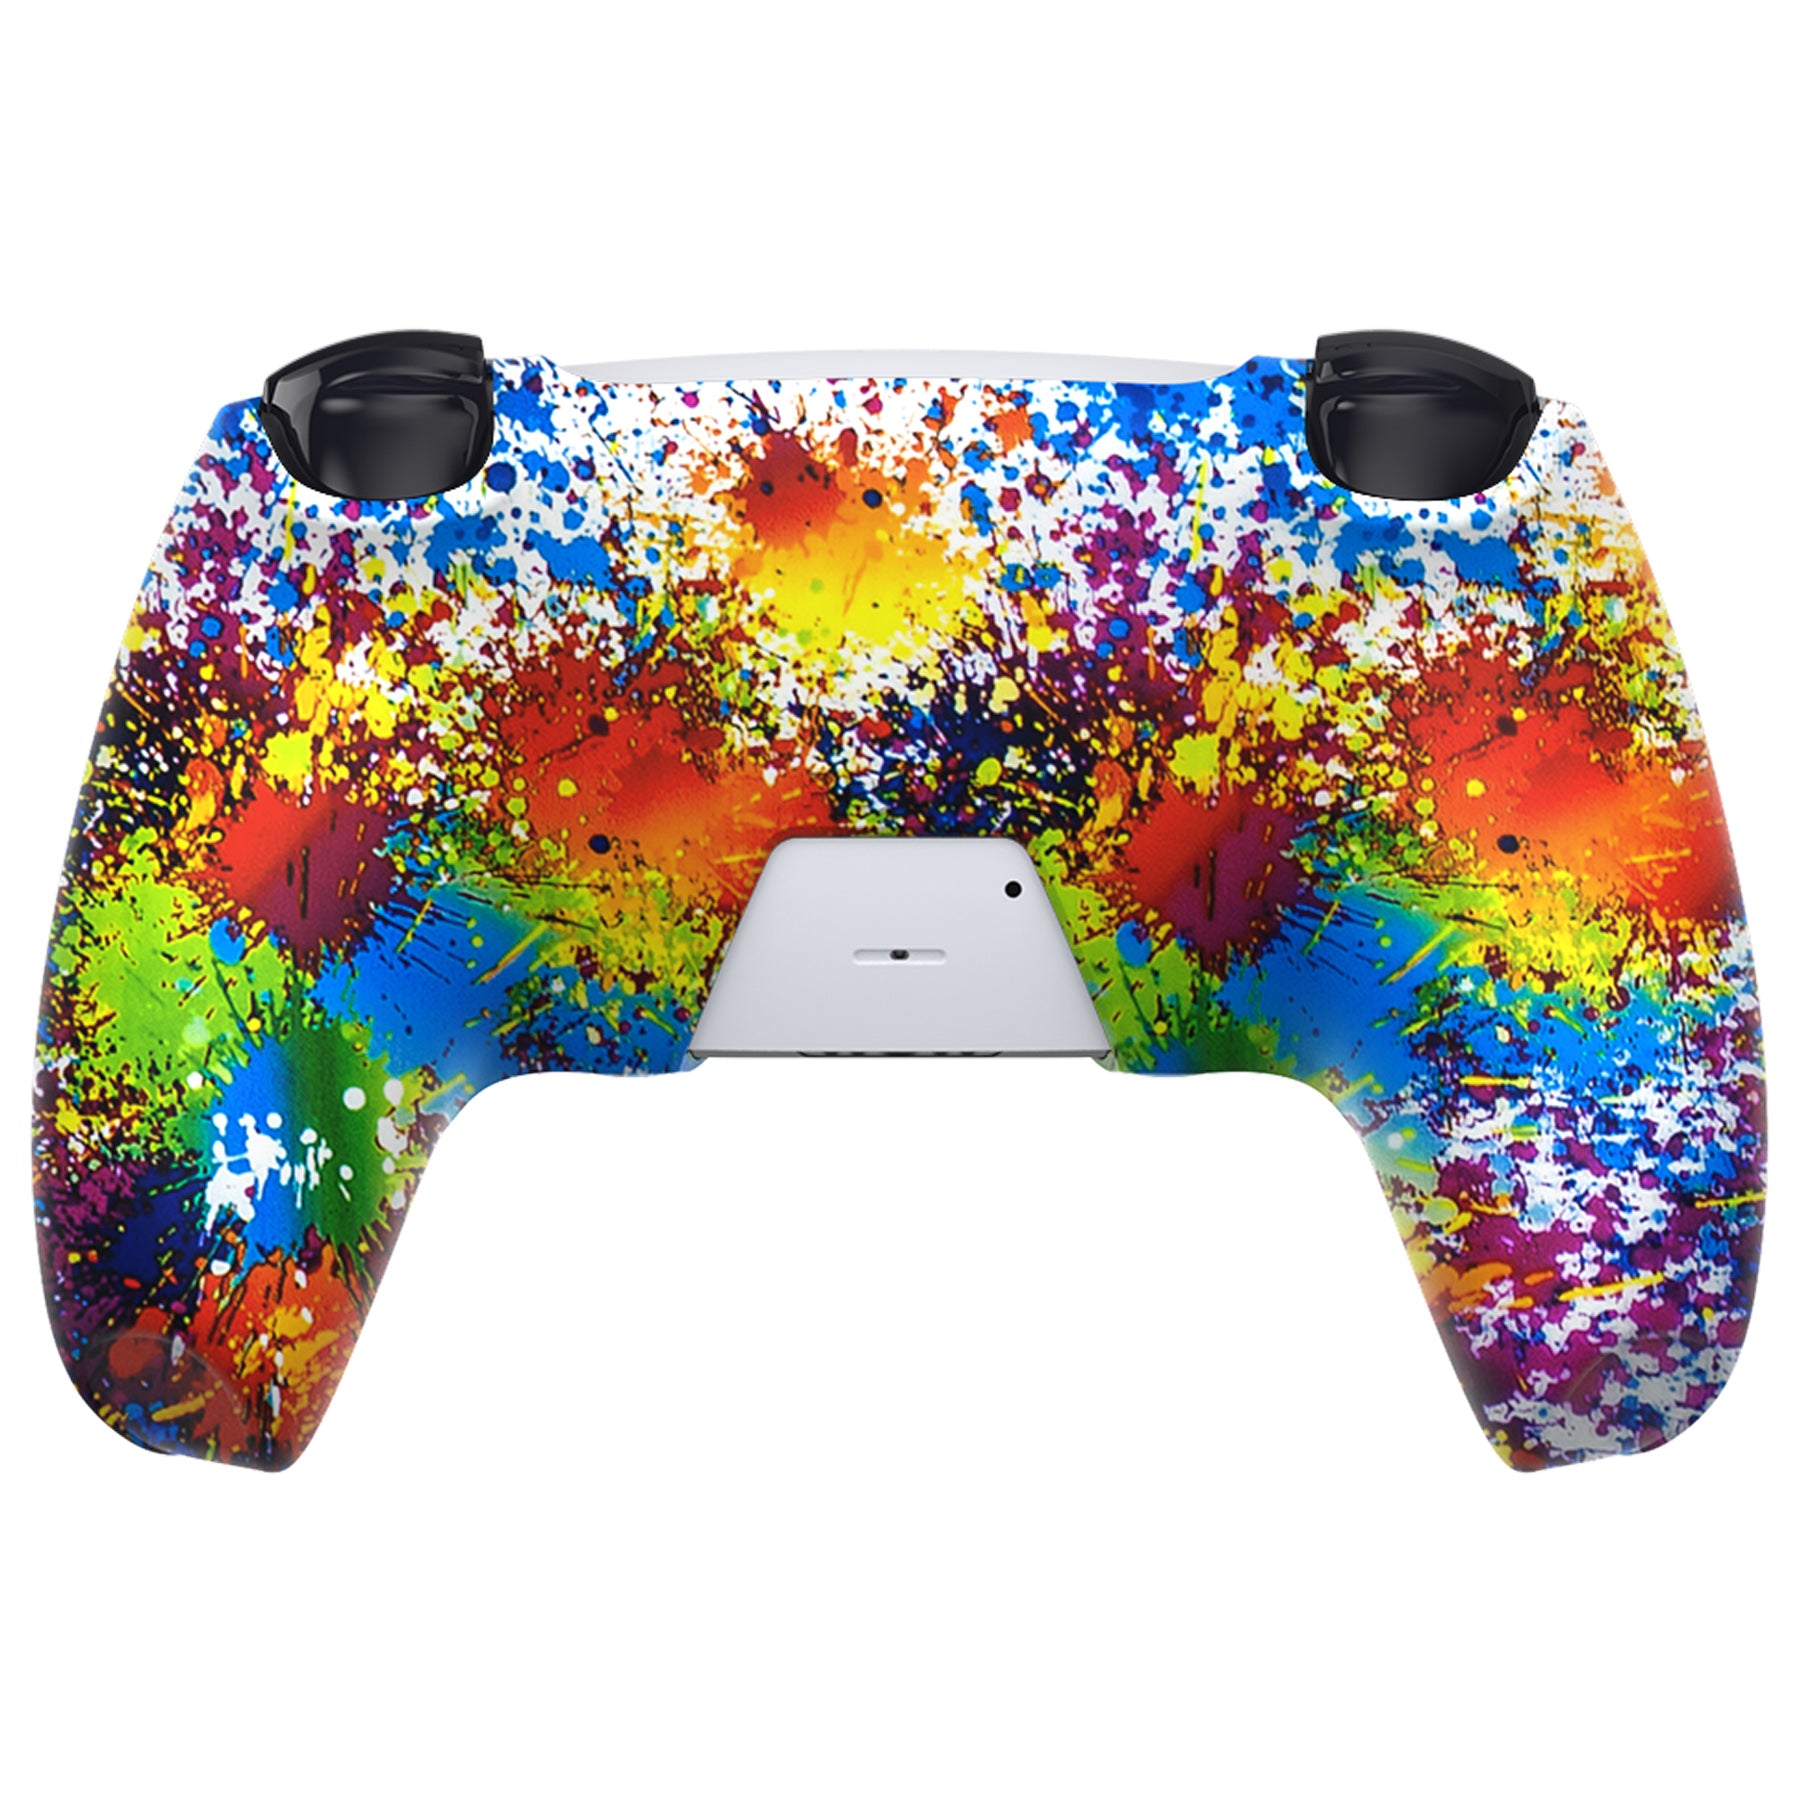 PlayVital Pure Series Dockable Model Anti-Slip Silicone Cover Skin with Thumb Grip Caps for PS5 Wireless Controller - Compatible with Charging Station - Colorful Splash - EKPFS002 PlayVital